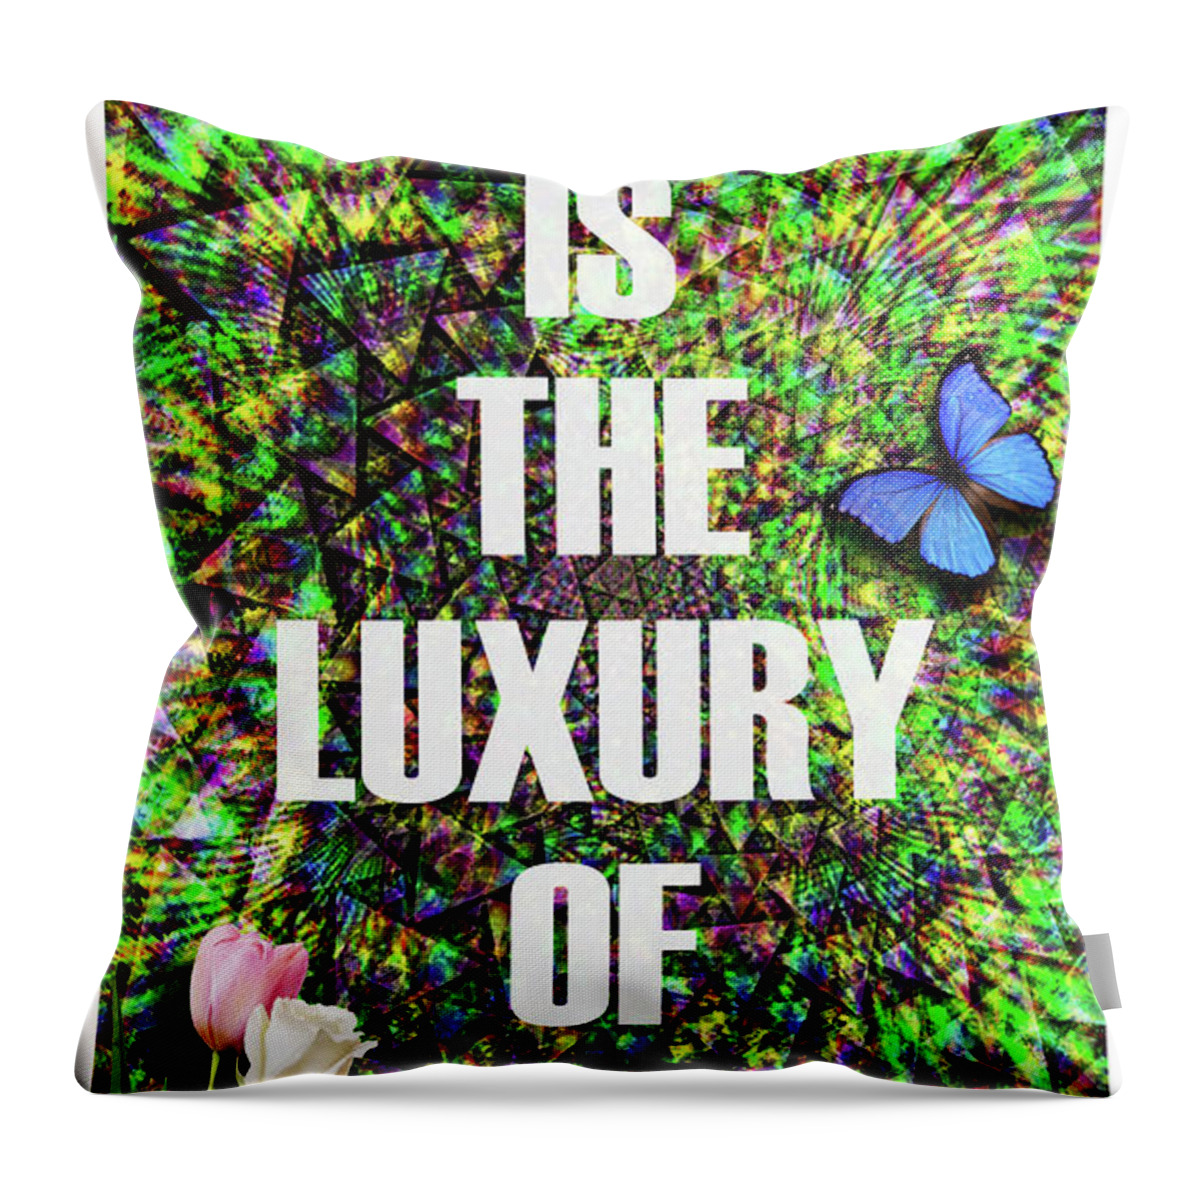 Inspiration Throw Pillow featuring the digital art Cannabis The Luxury Of God by J U A N - O A X A C A